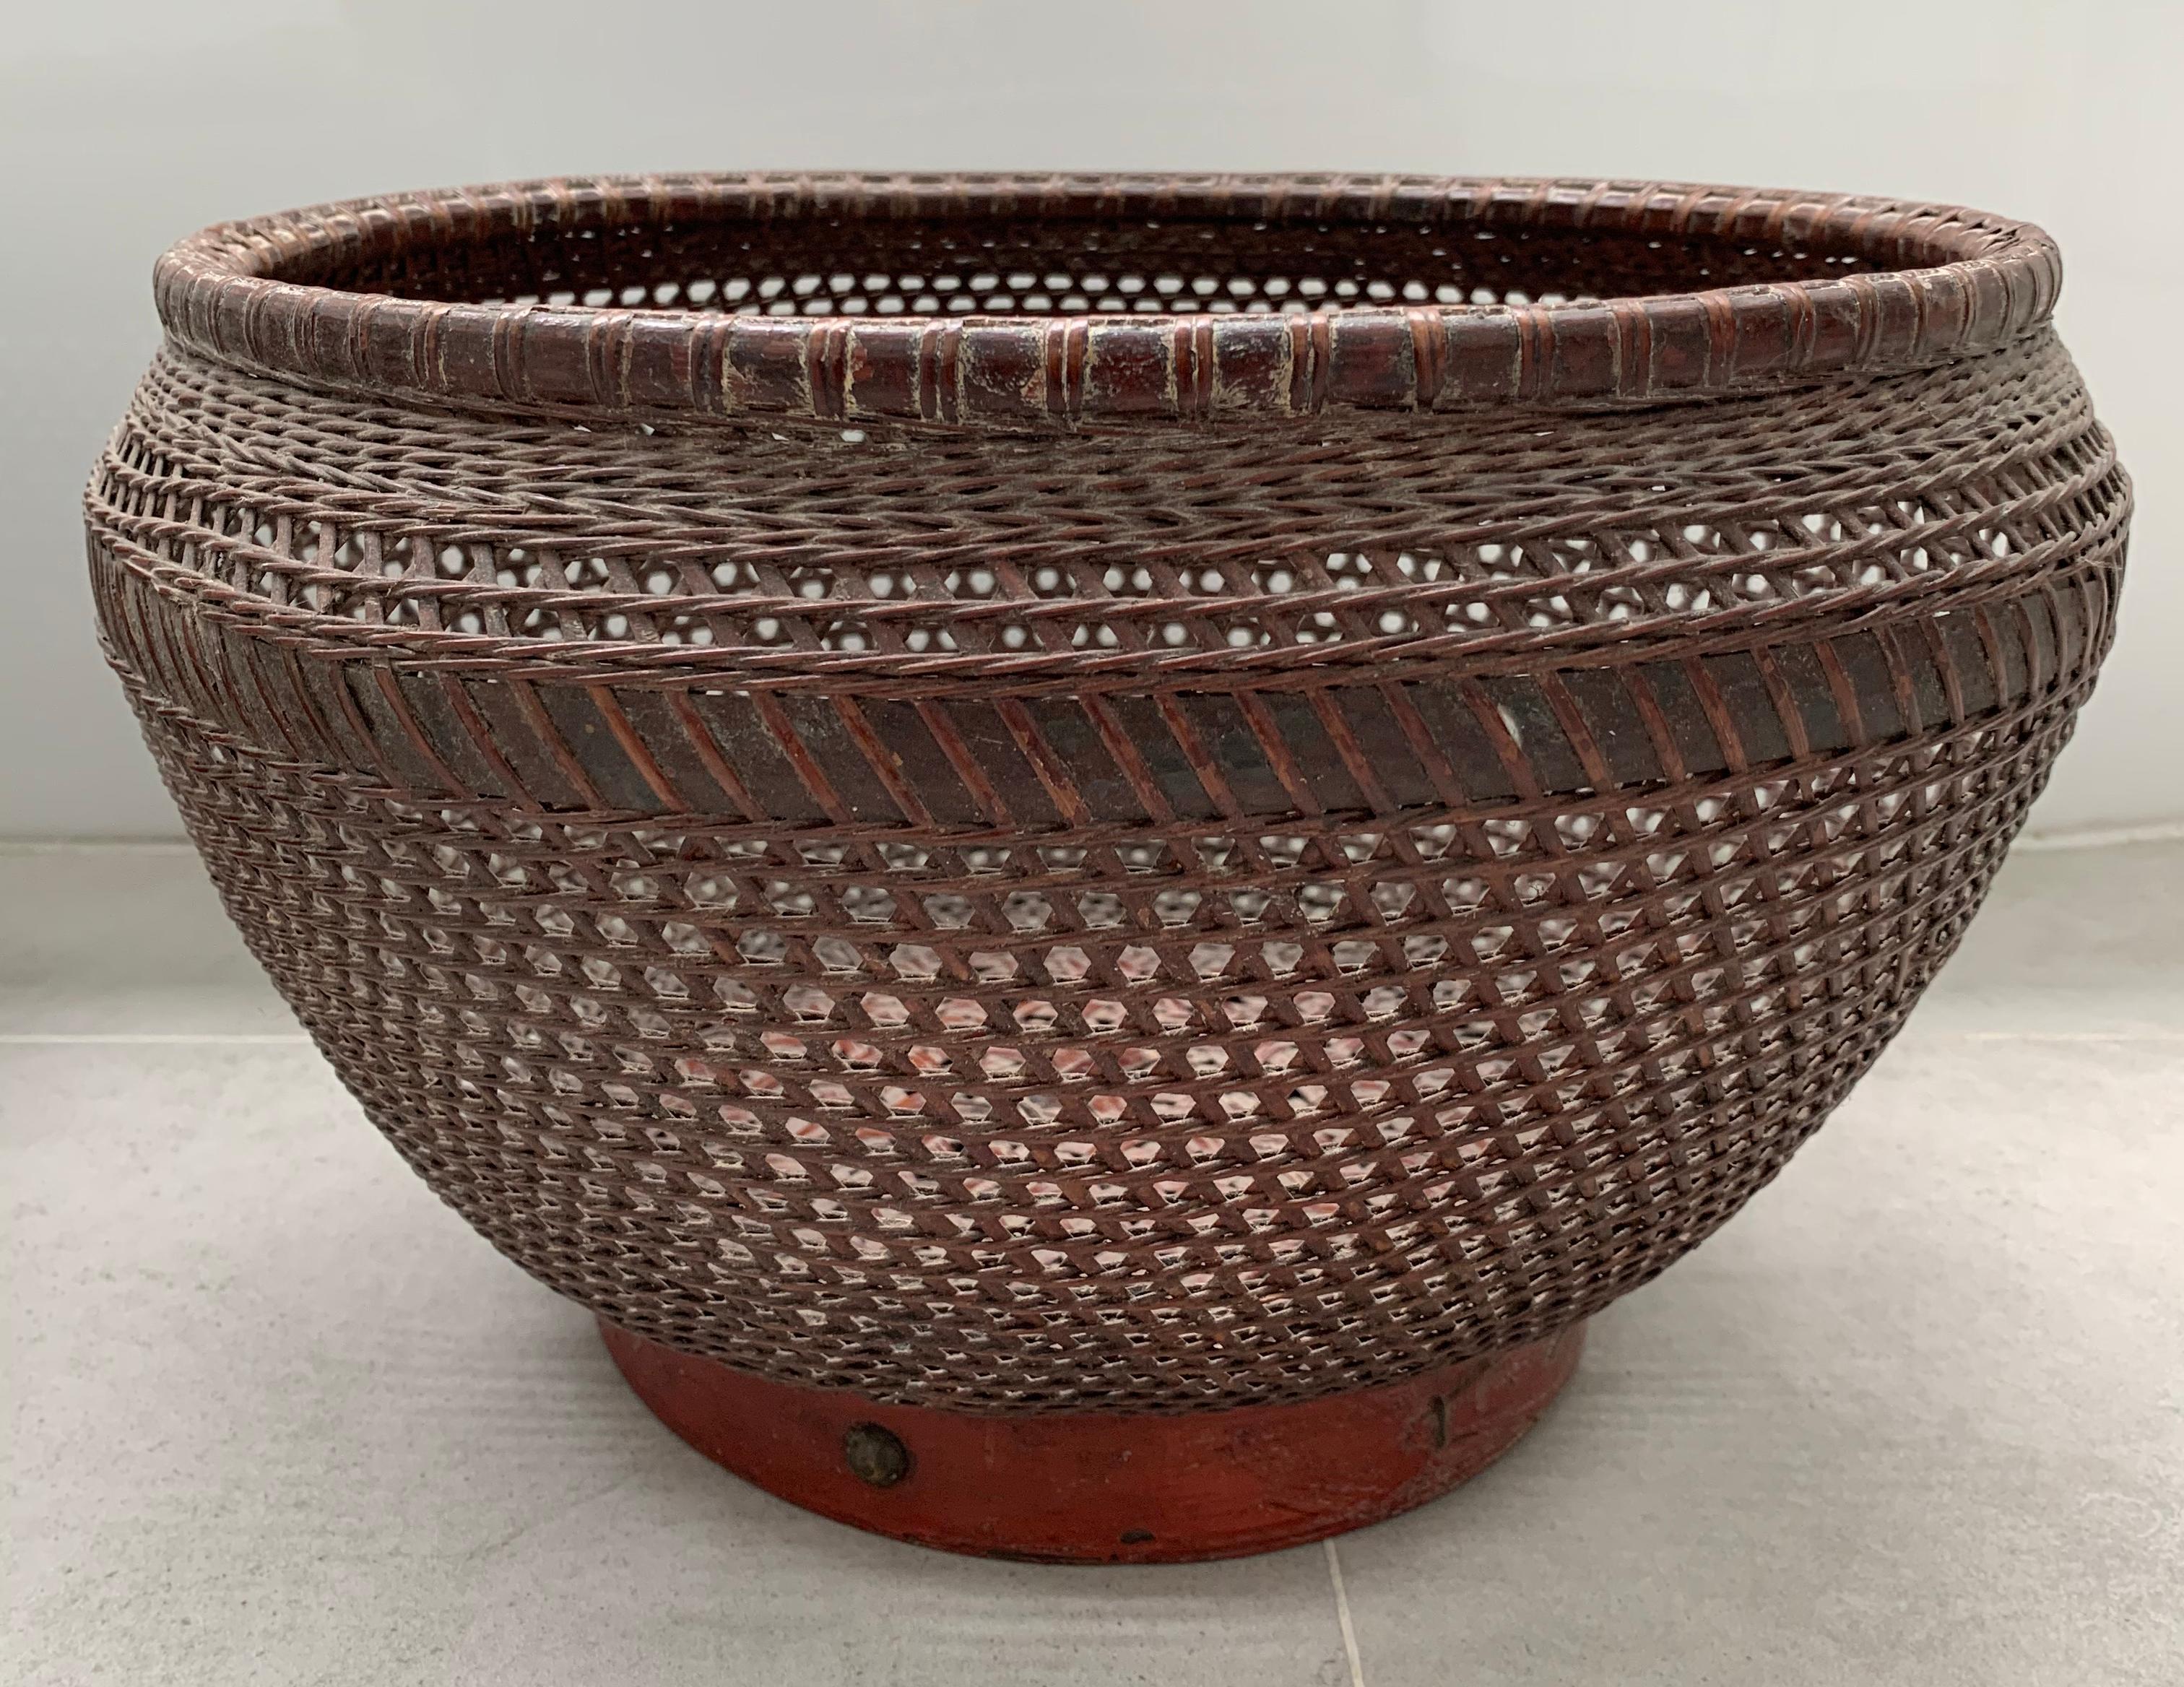 This pair of hand-woven Chinese Baskets feature a red wood lacquered base and brown rattan fibres. Their minimalist design makes them suitable as a decorative addition to any space. 

Dimensions: Depth 30cm x Height 20cm & Depth 32cm x Height 20cm.